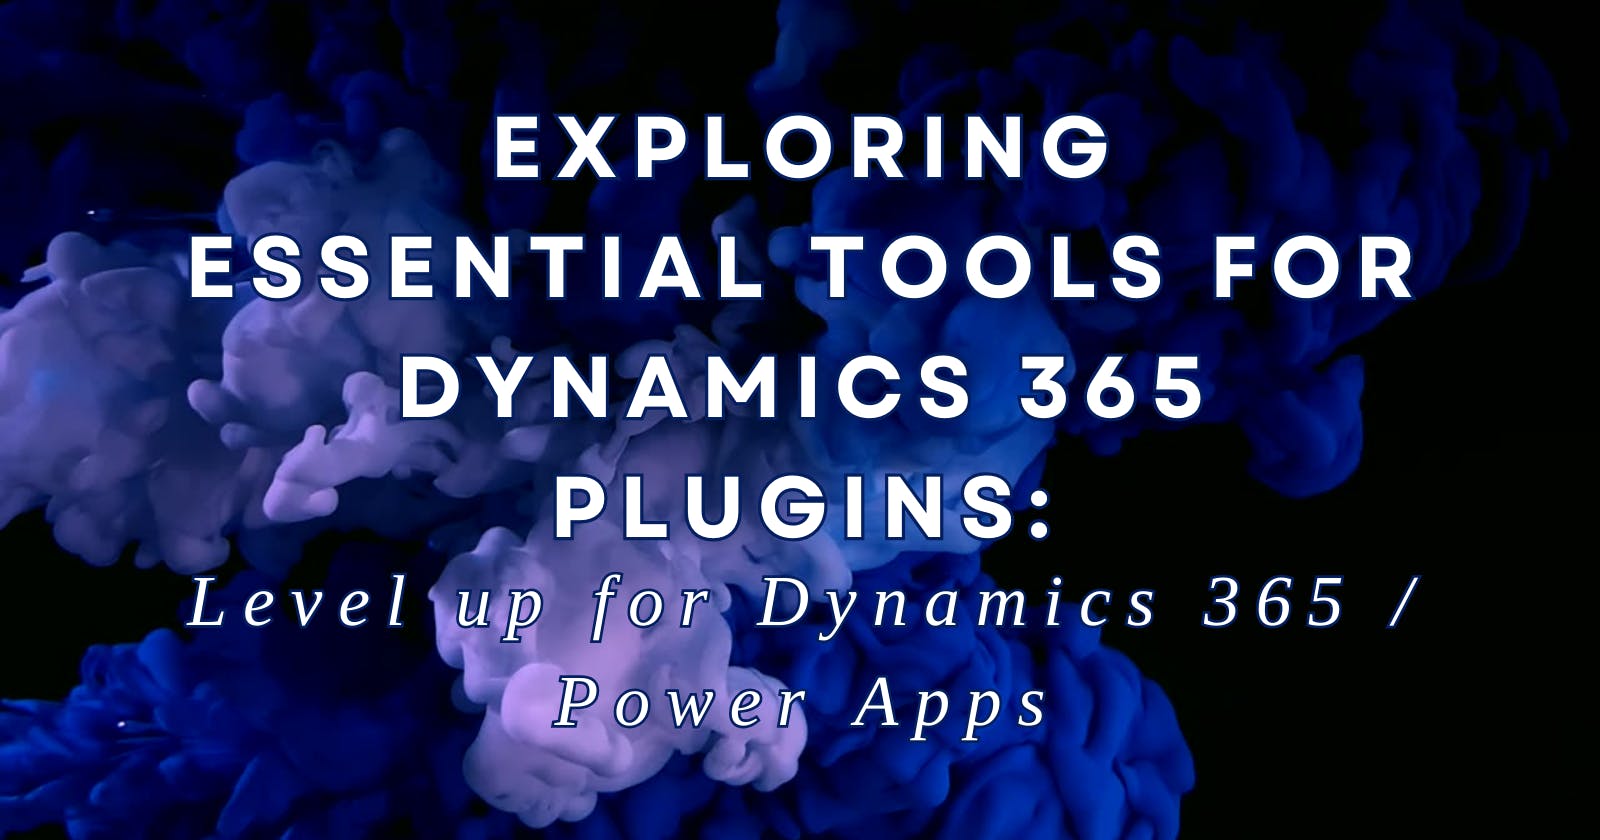 Exploring Essential Tools for Dynamics 365 Plugins: Level up for Dynamics 365/Power Apps